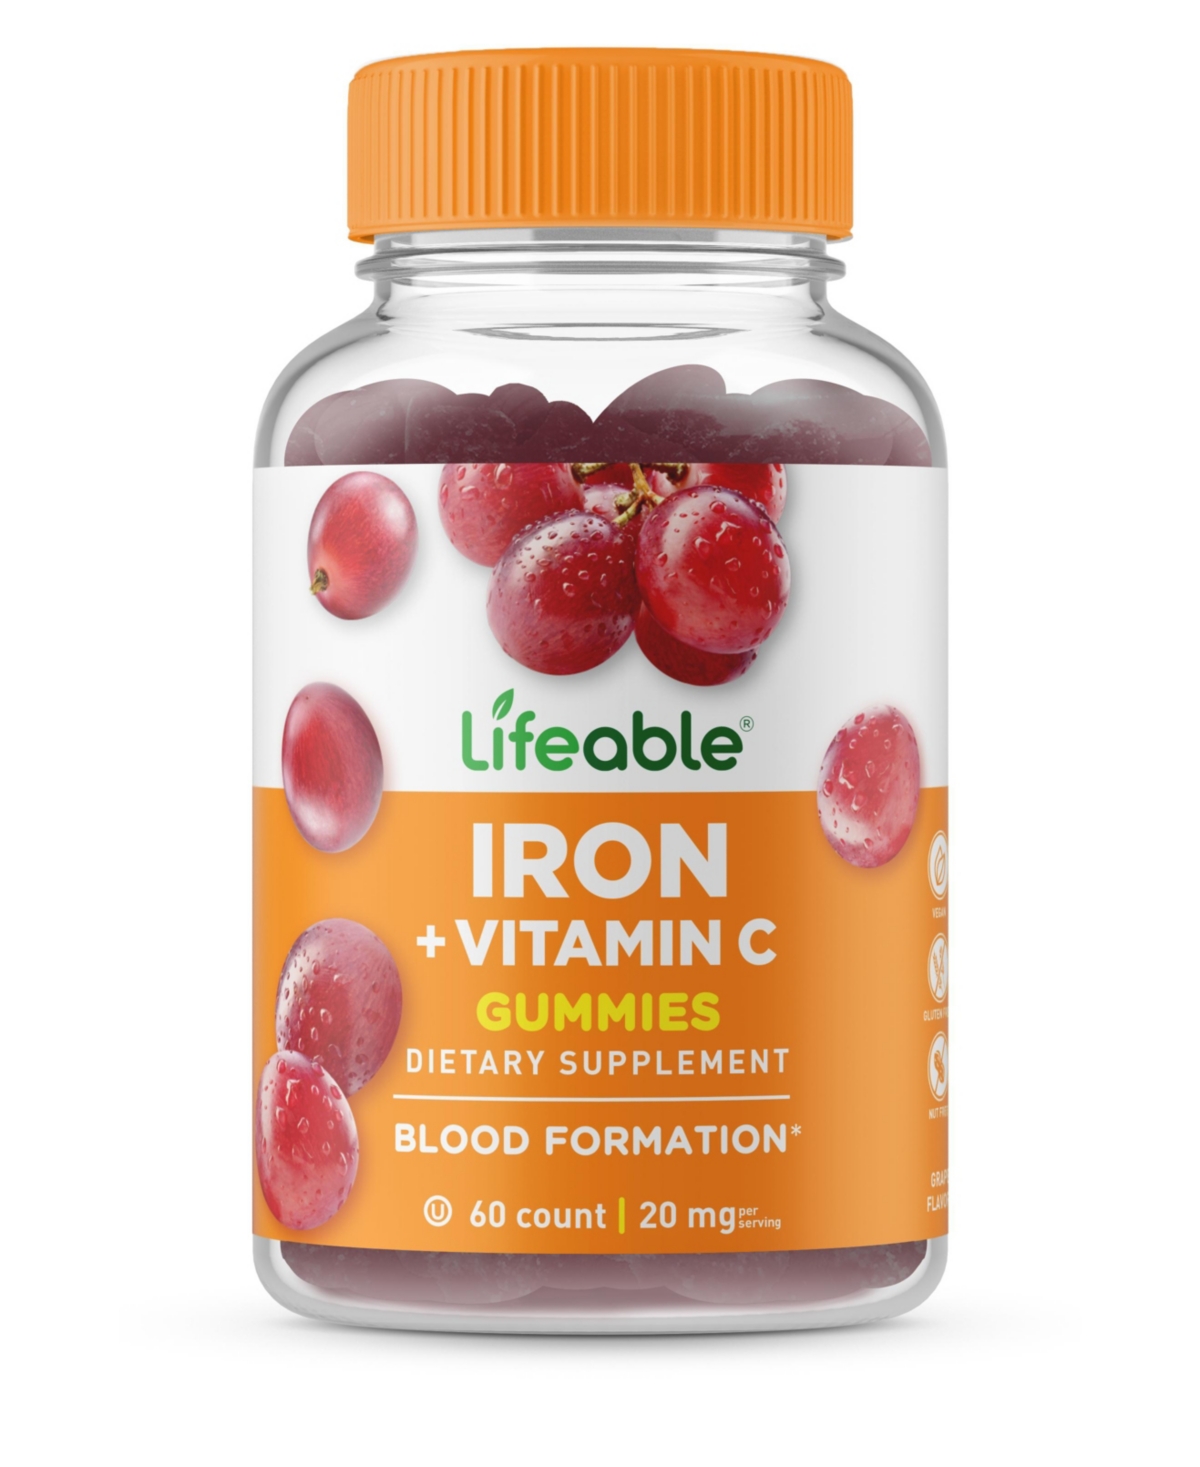 Iron 20 mg with Vitamin C Gummies - Healthy Iron Levels - Great Tasting Natural Flavor, Dietary Supplement Vitamins - 60 Gummies - Open Misce